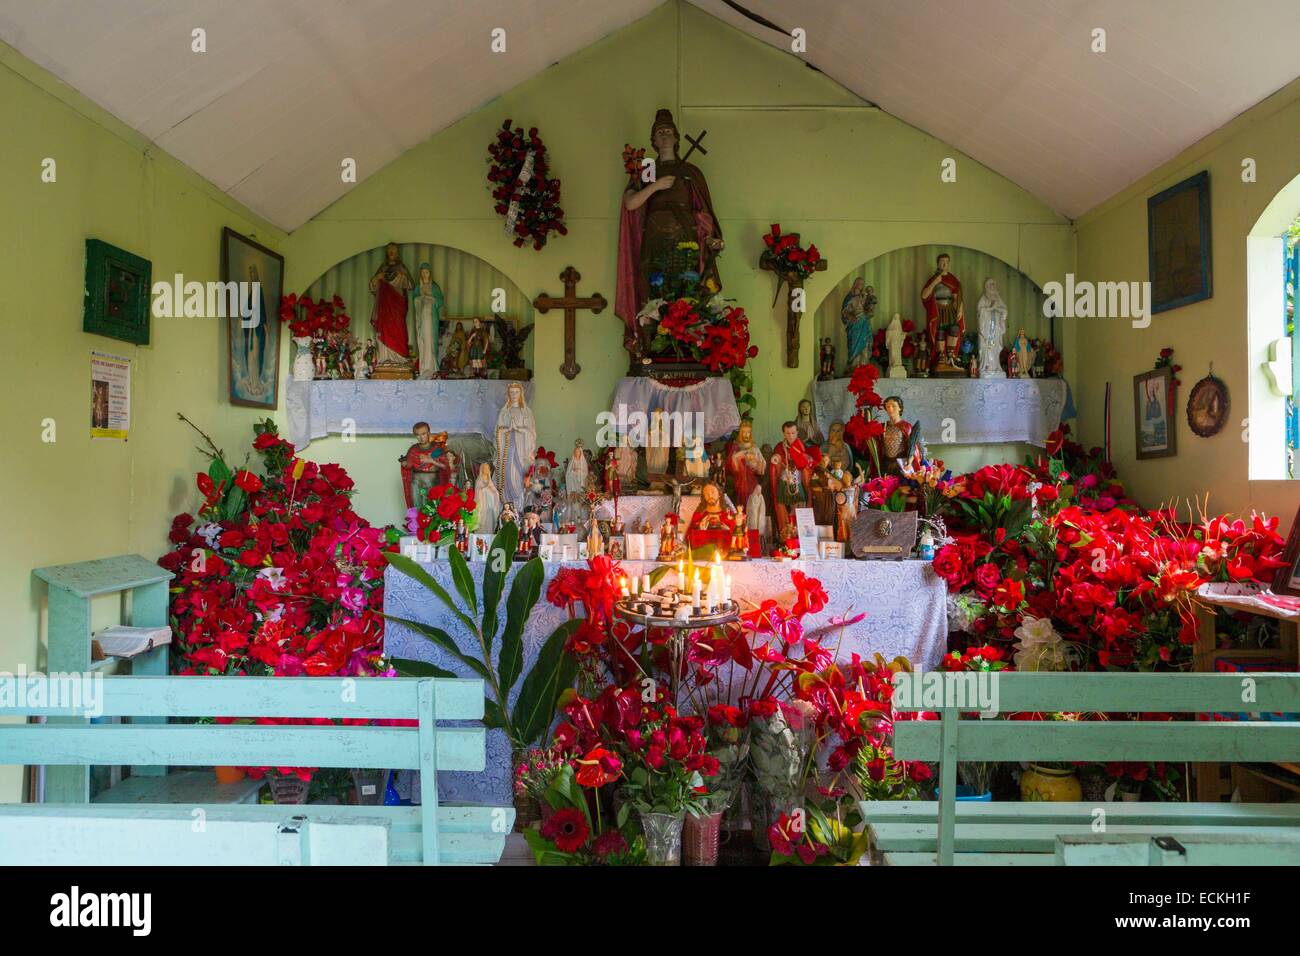 France, Reunion Island, Saint Philippe, Chapel Saint Expedit, customs and religious traditions view inside a chapel Stock Photo